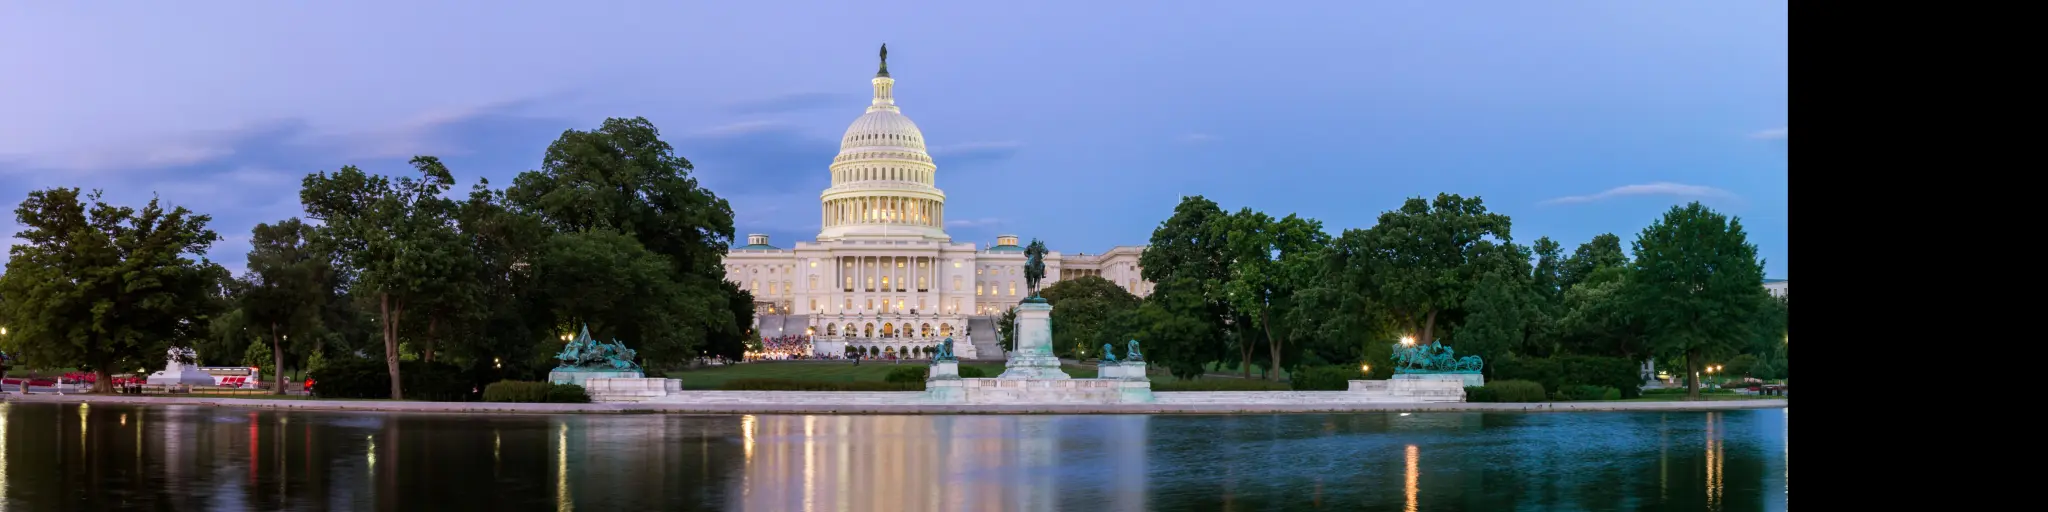 United States Capitol building in Washington, District of Columbia